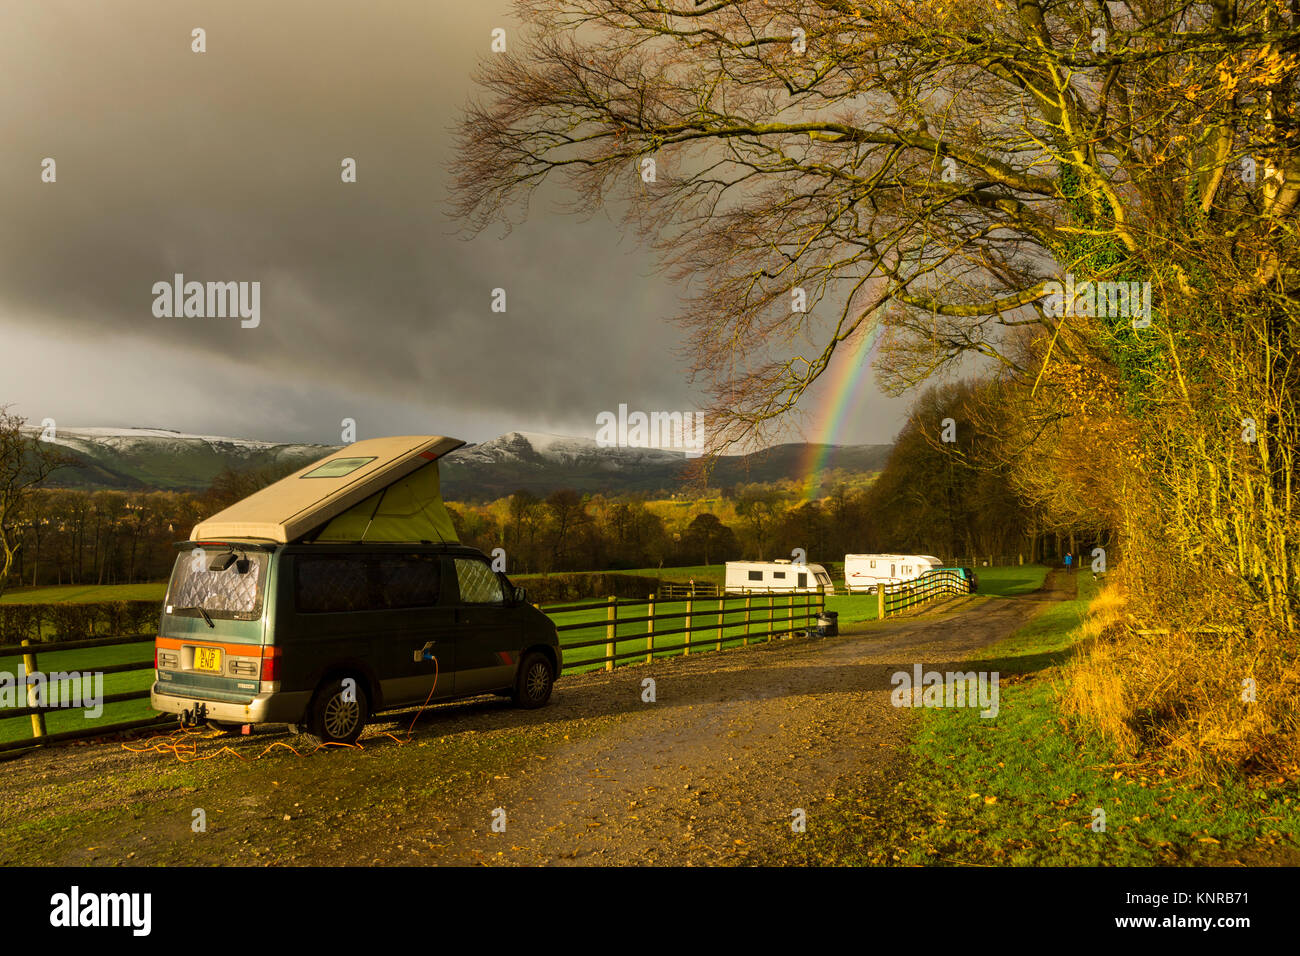 A Mazda Bongo campervan at a small caravan site at Farfield Farm, near Hope village, Peak District, Derbyshire, England, UK.  Mam Tor in the distance. Stock Photo